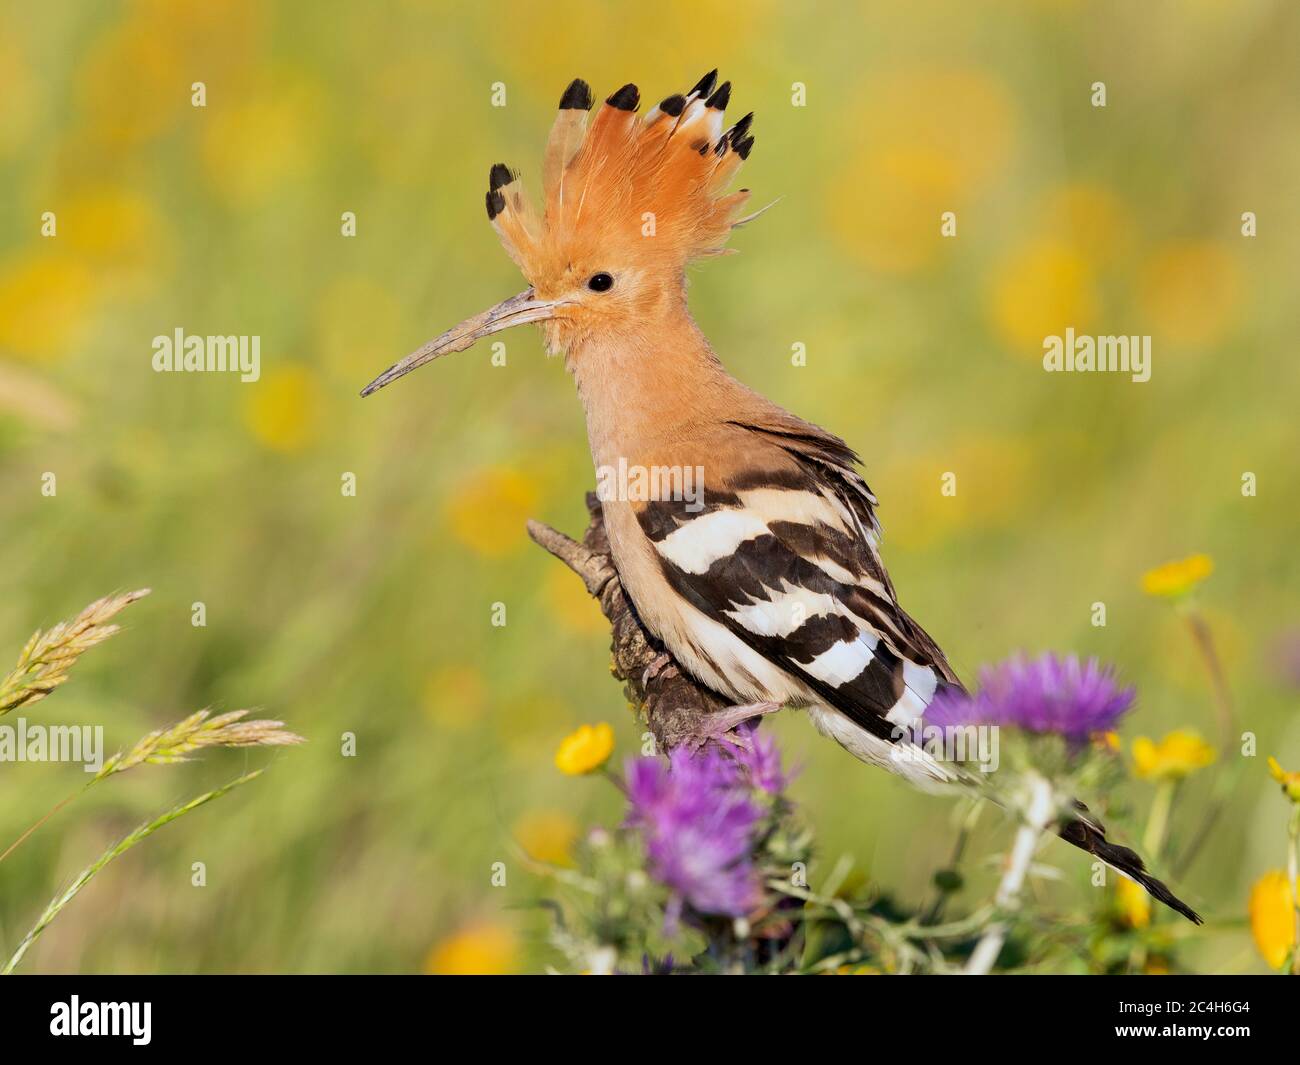 Eurasian Hoopoe (Upupa epops), side view of an adult perched on a branch, Campania, Italy Stock Photo